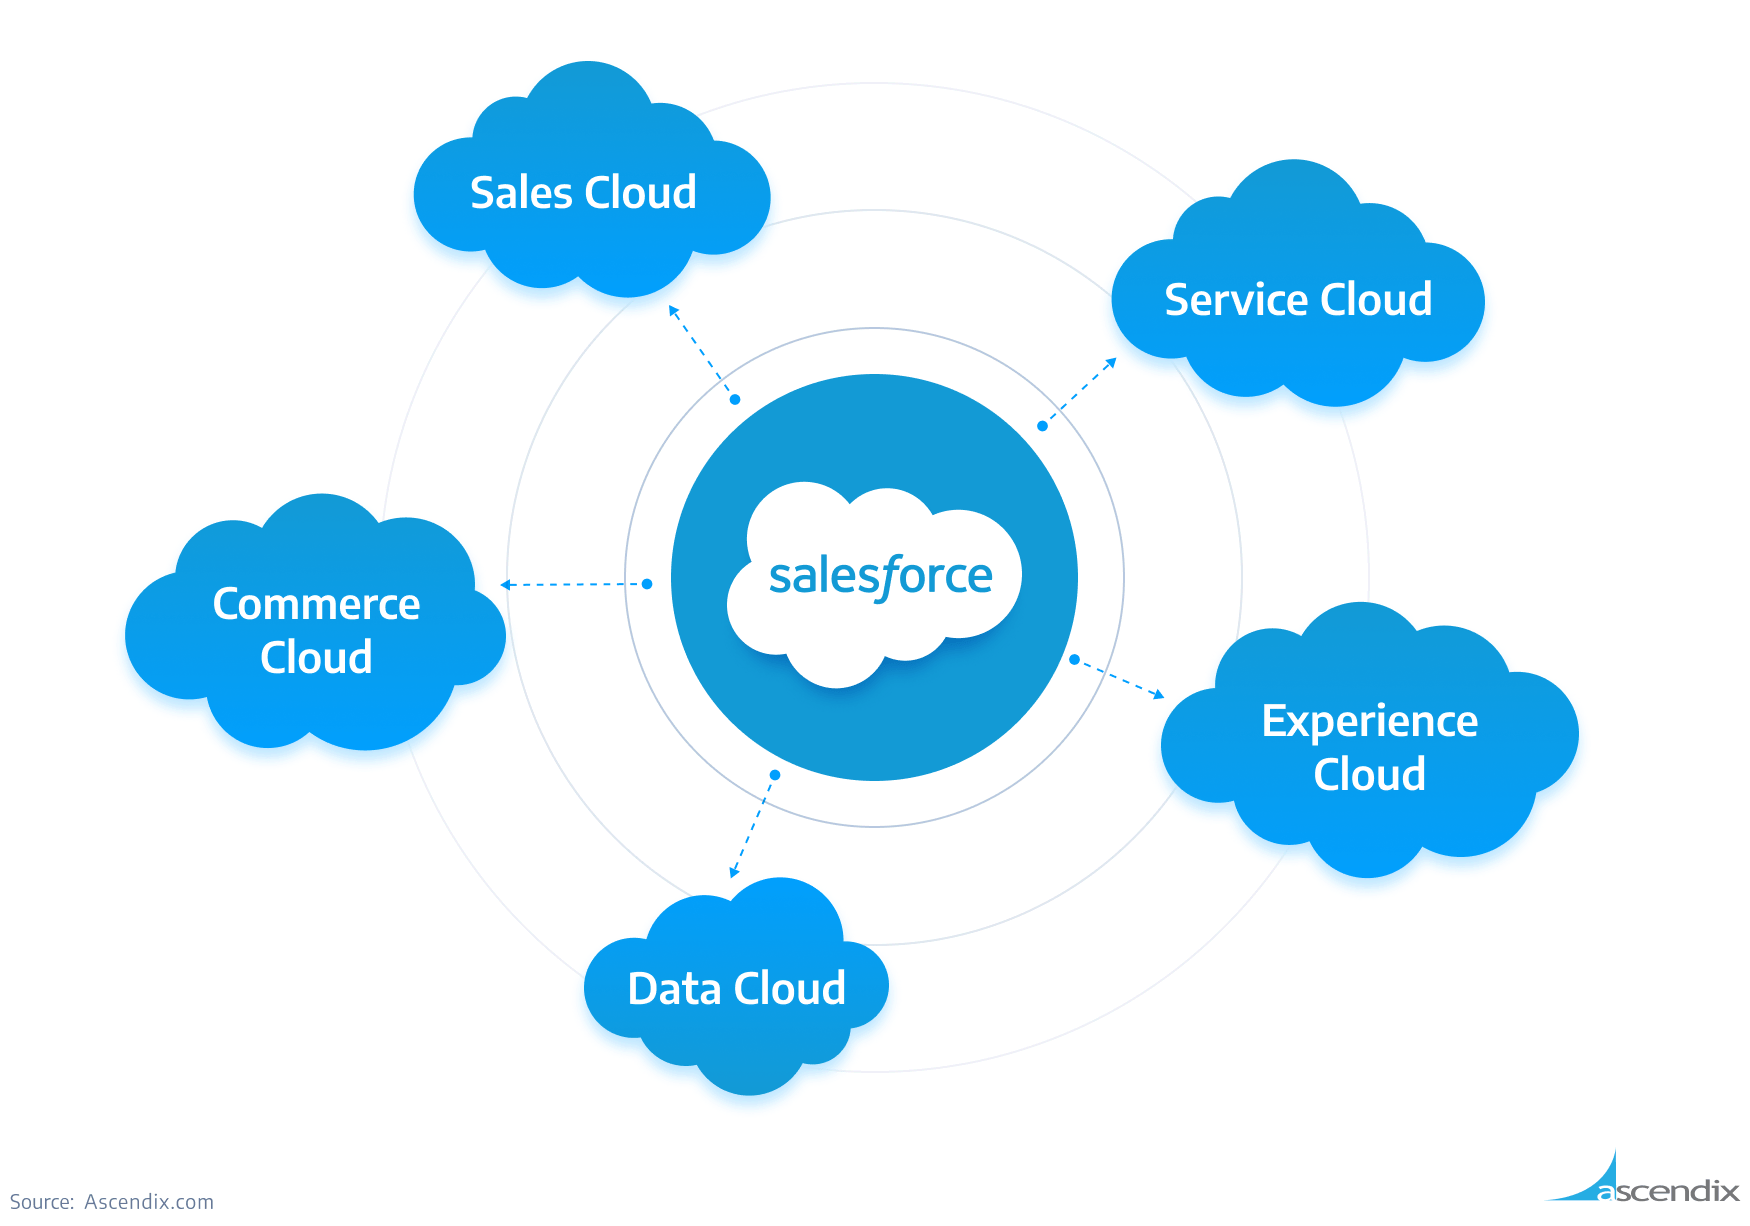 image showing the possible Salesforce Marketing Cloud integrations with other salesforce clouds